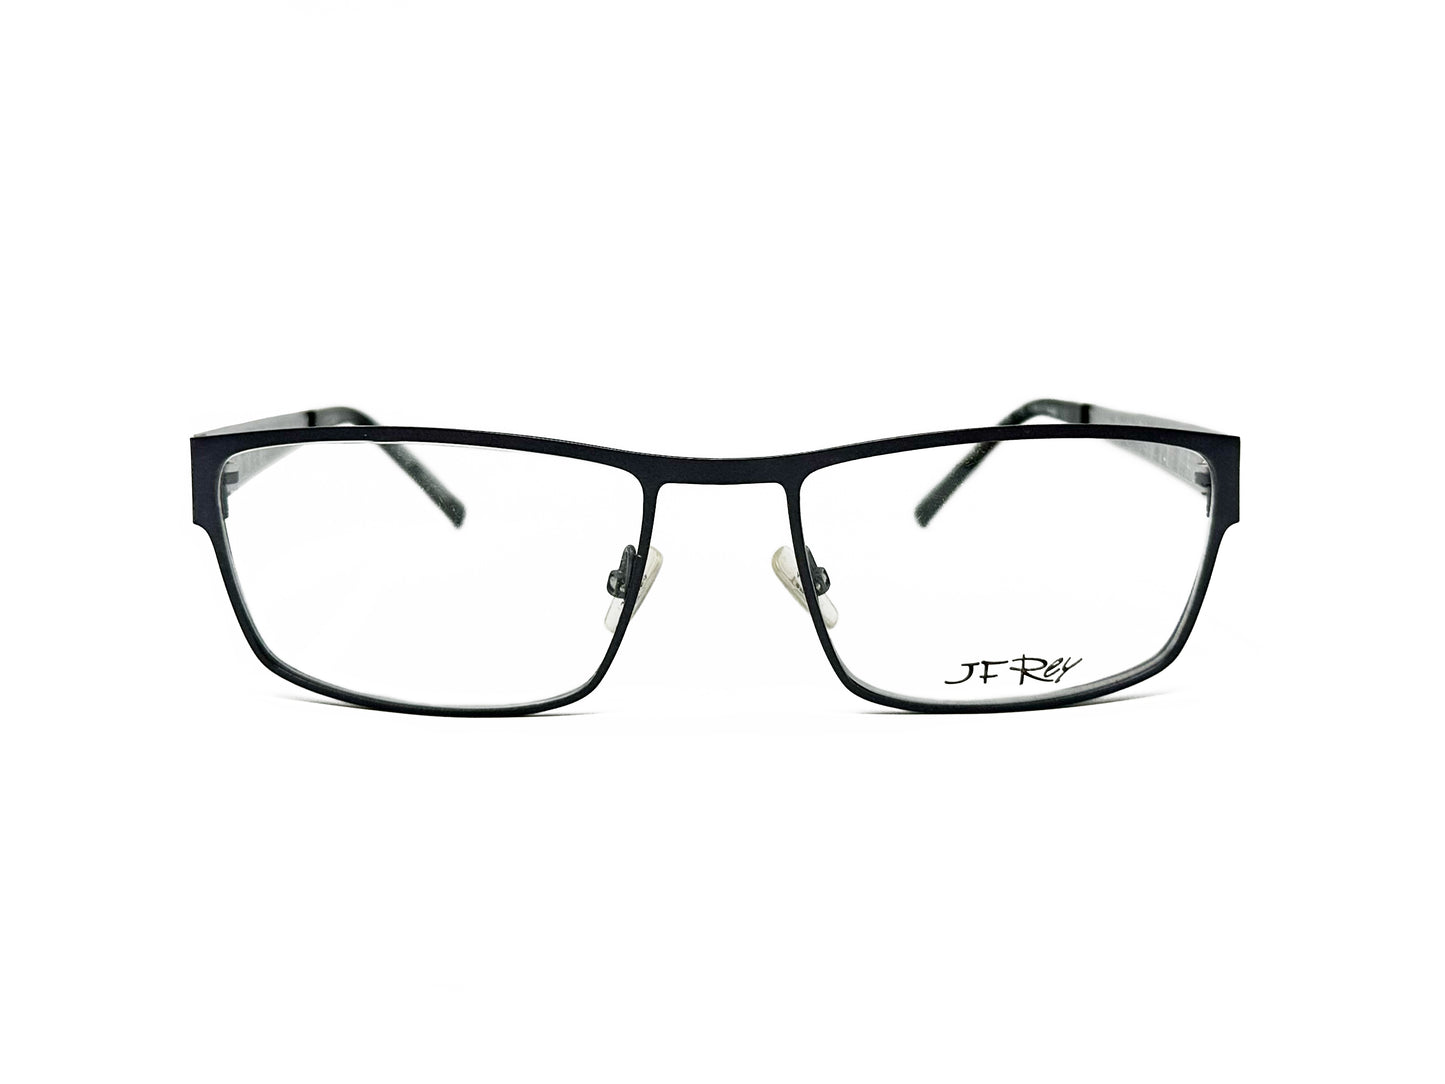 JF Rey rectangular, metal, optical frame with linen pattern cutout on temples. Model: JF2586. Color: 0513 - Black. Front view.